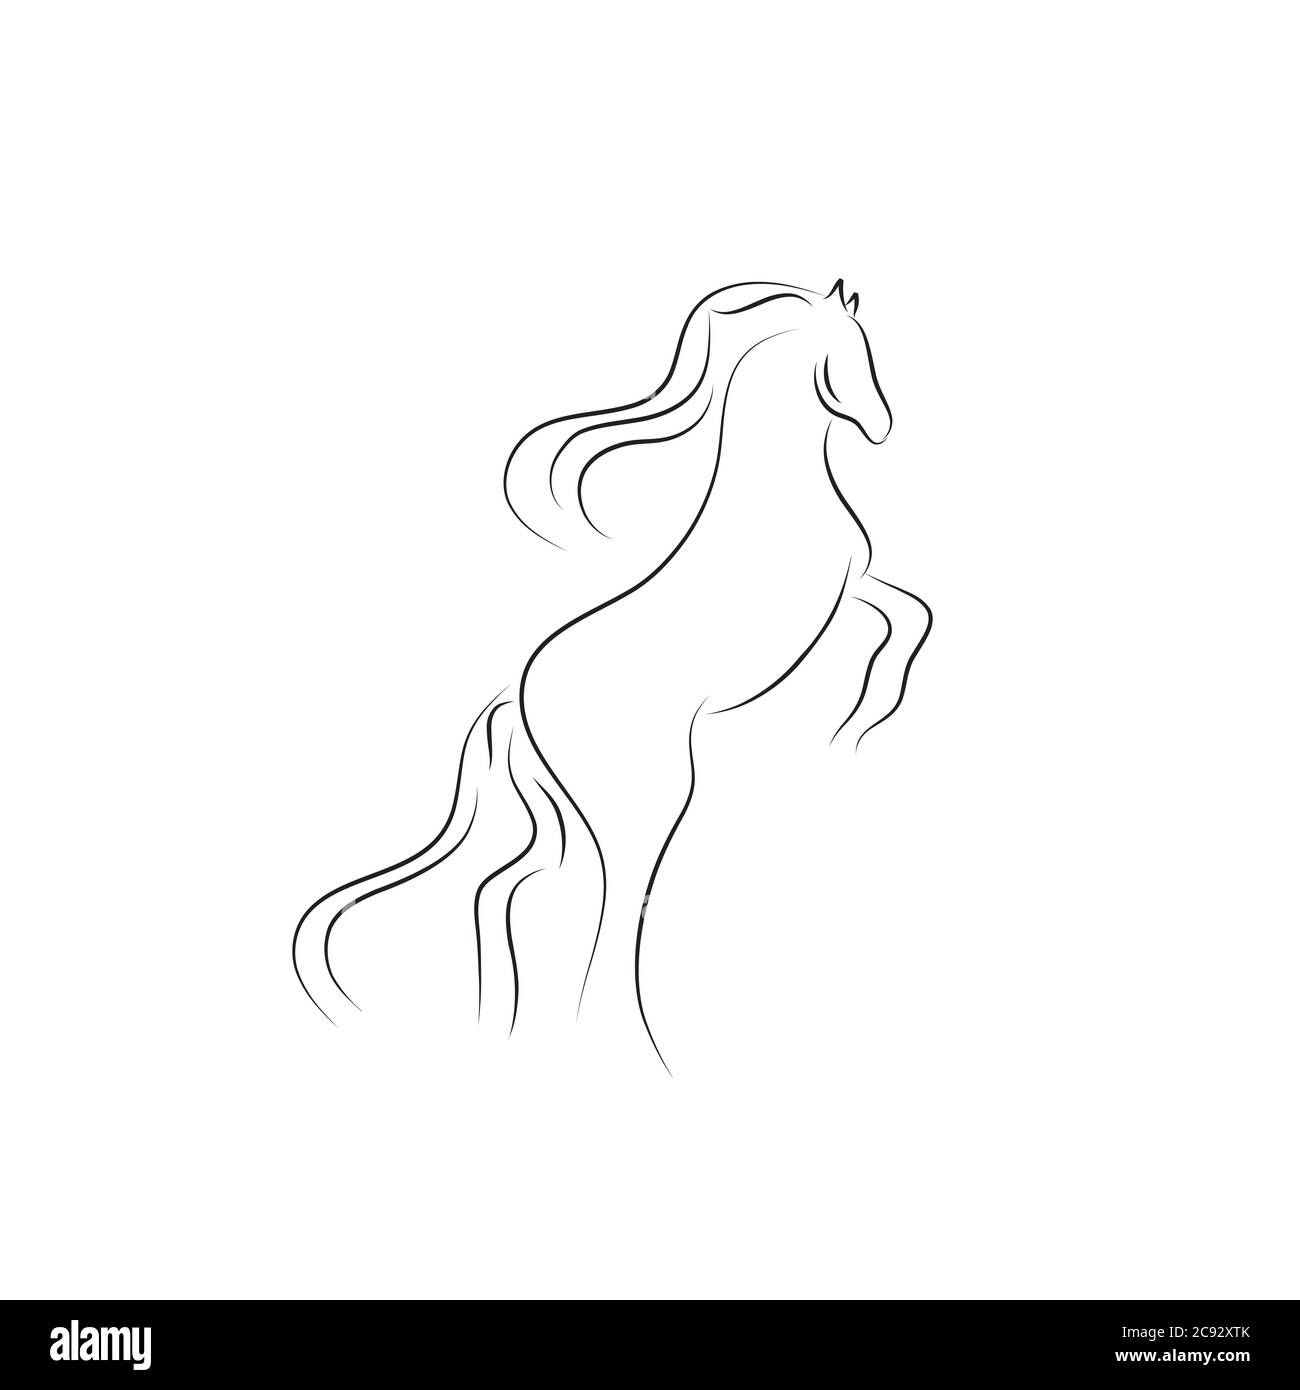 Continuous one line drawing. Horse logo. Black and white vector illustration. Concept for logo, card, banner, poster, flyer Stock Vector